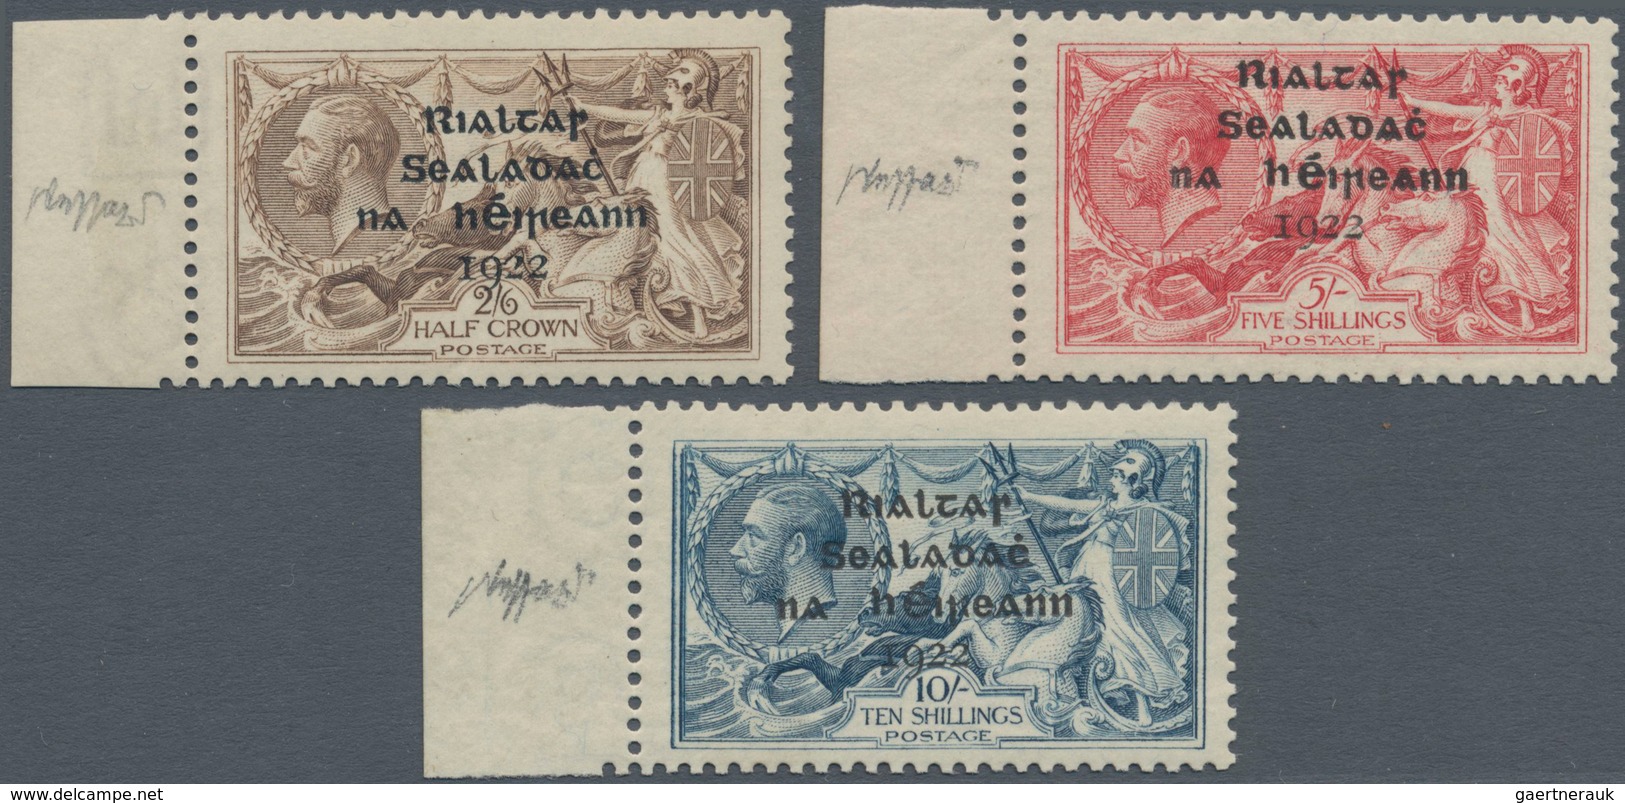 Irland: 1922, Rialtas Overprints, Dollard Printing, 2s.6d. Brown, 5s. Rose-carmine And 10s. Dull Gre - Covers & Documents